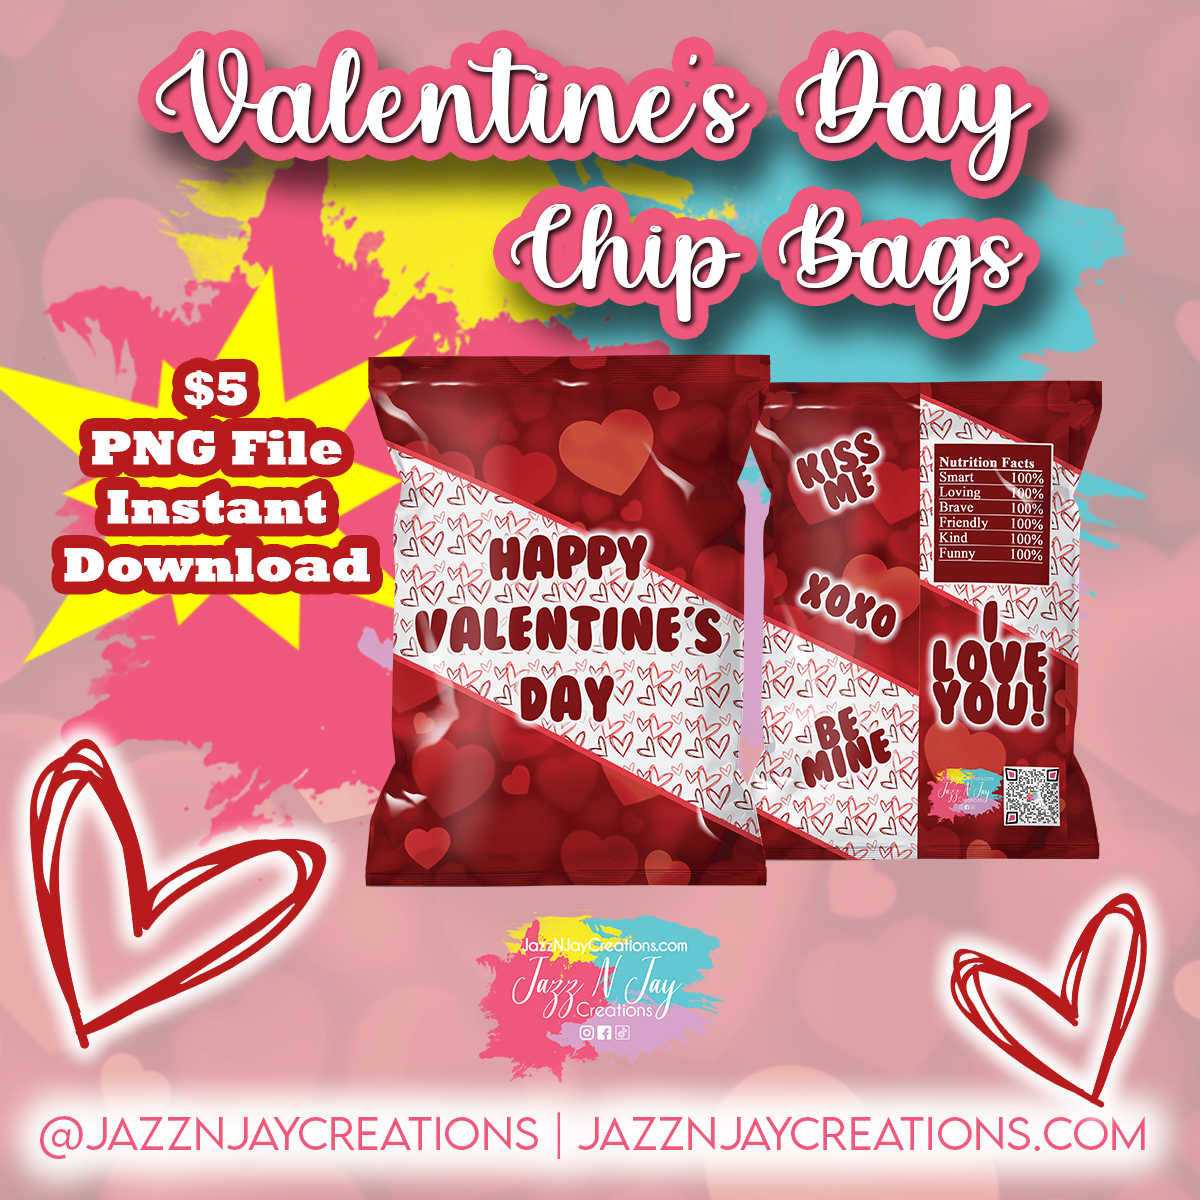 Toy Story Valentines Day Goodie Bags Chip Bag Template